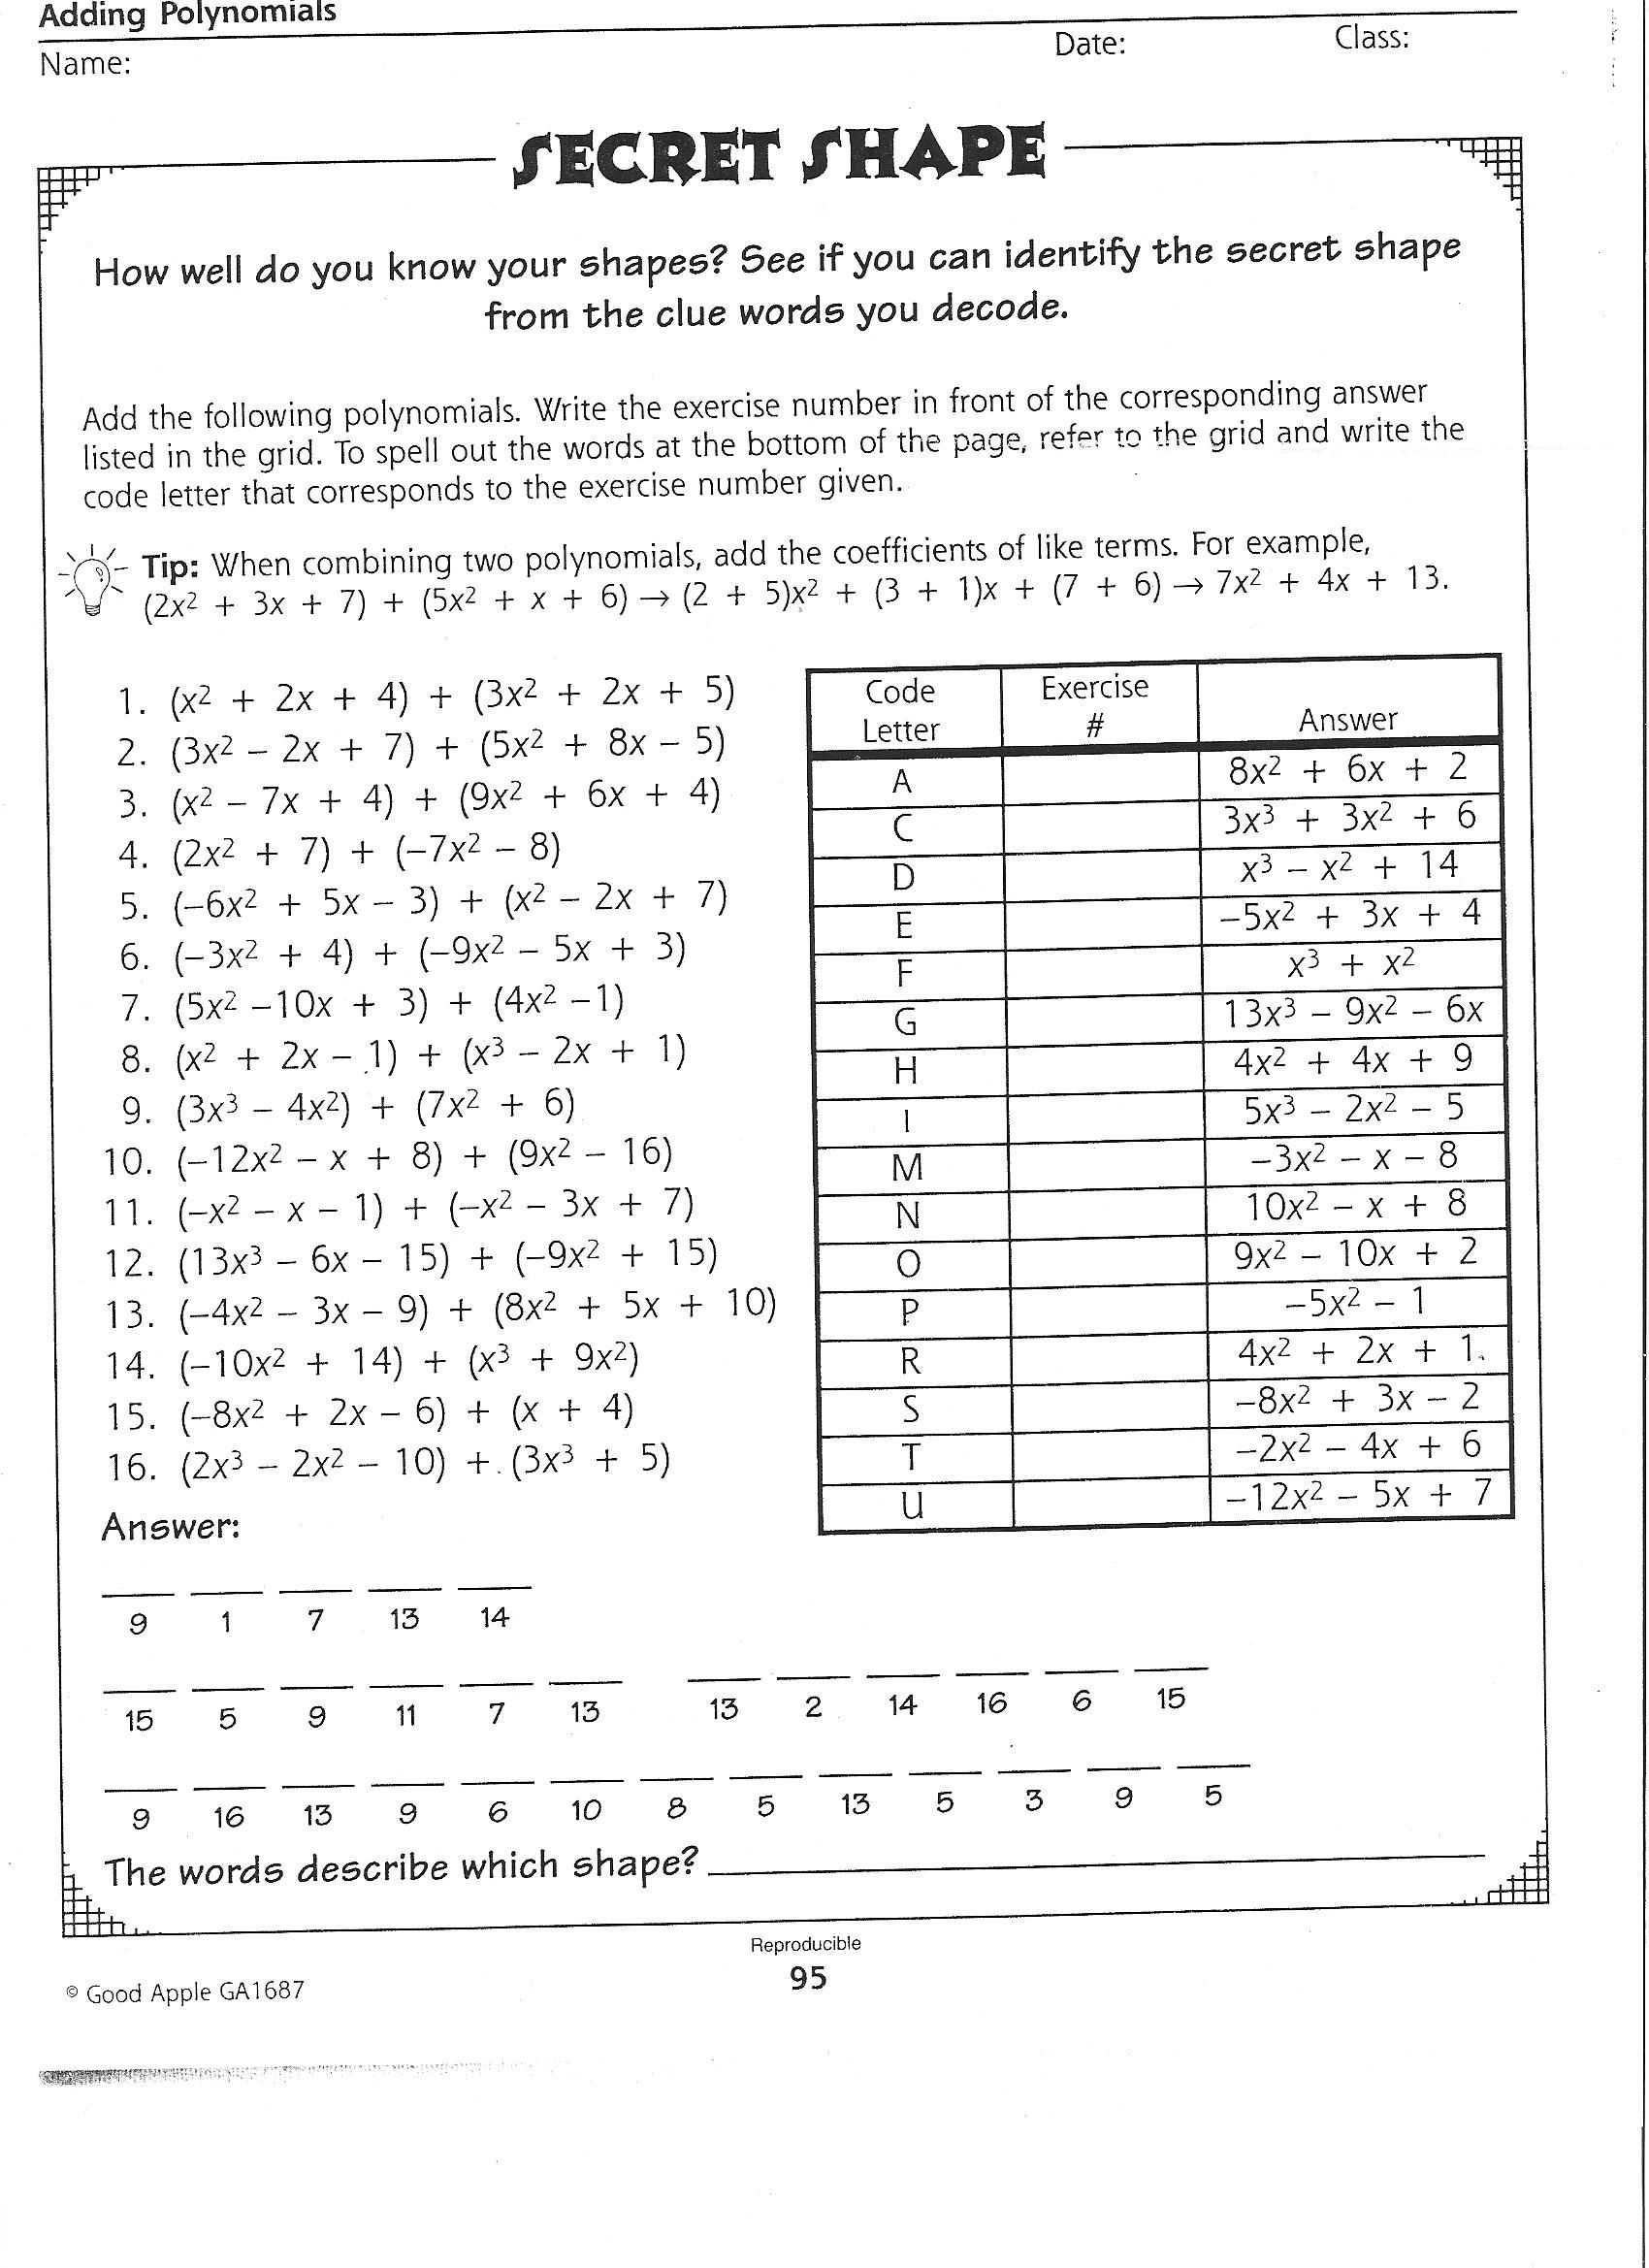 Square Root Equations Worksheet Along with Worksheet Adding Polynomials Jpg 17002338